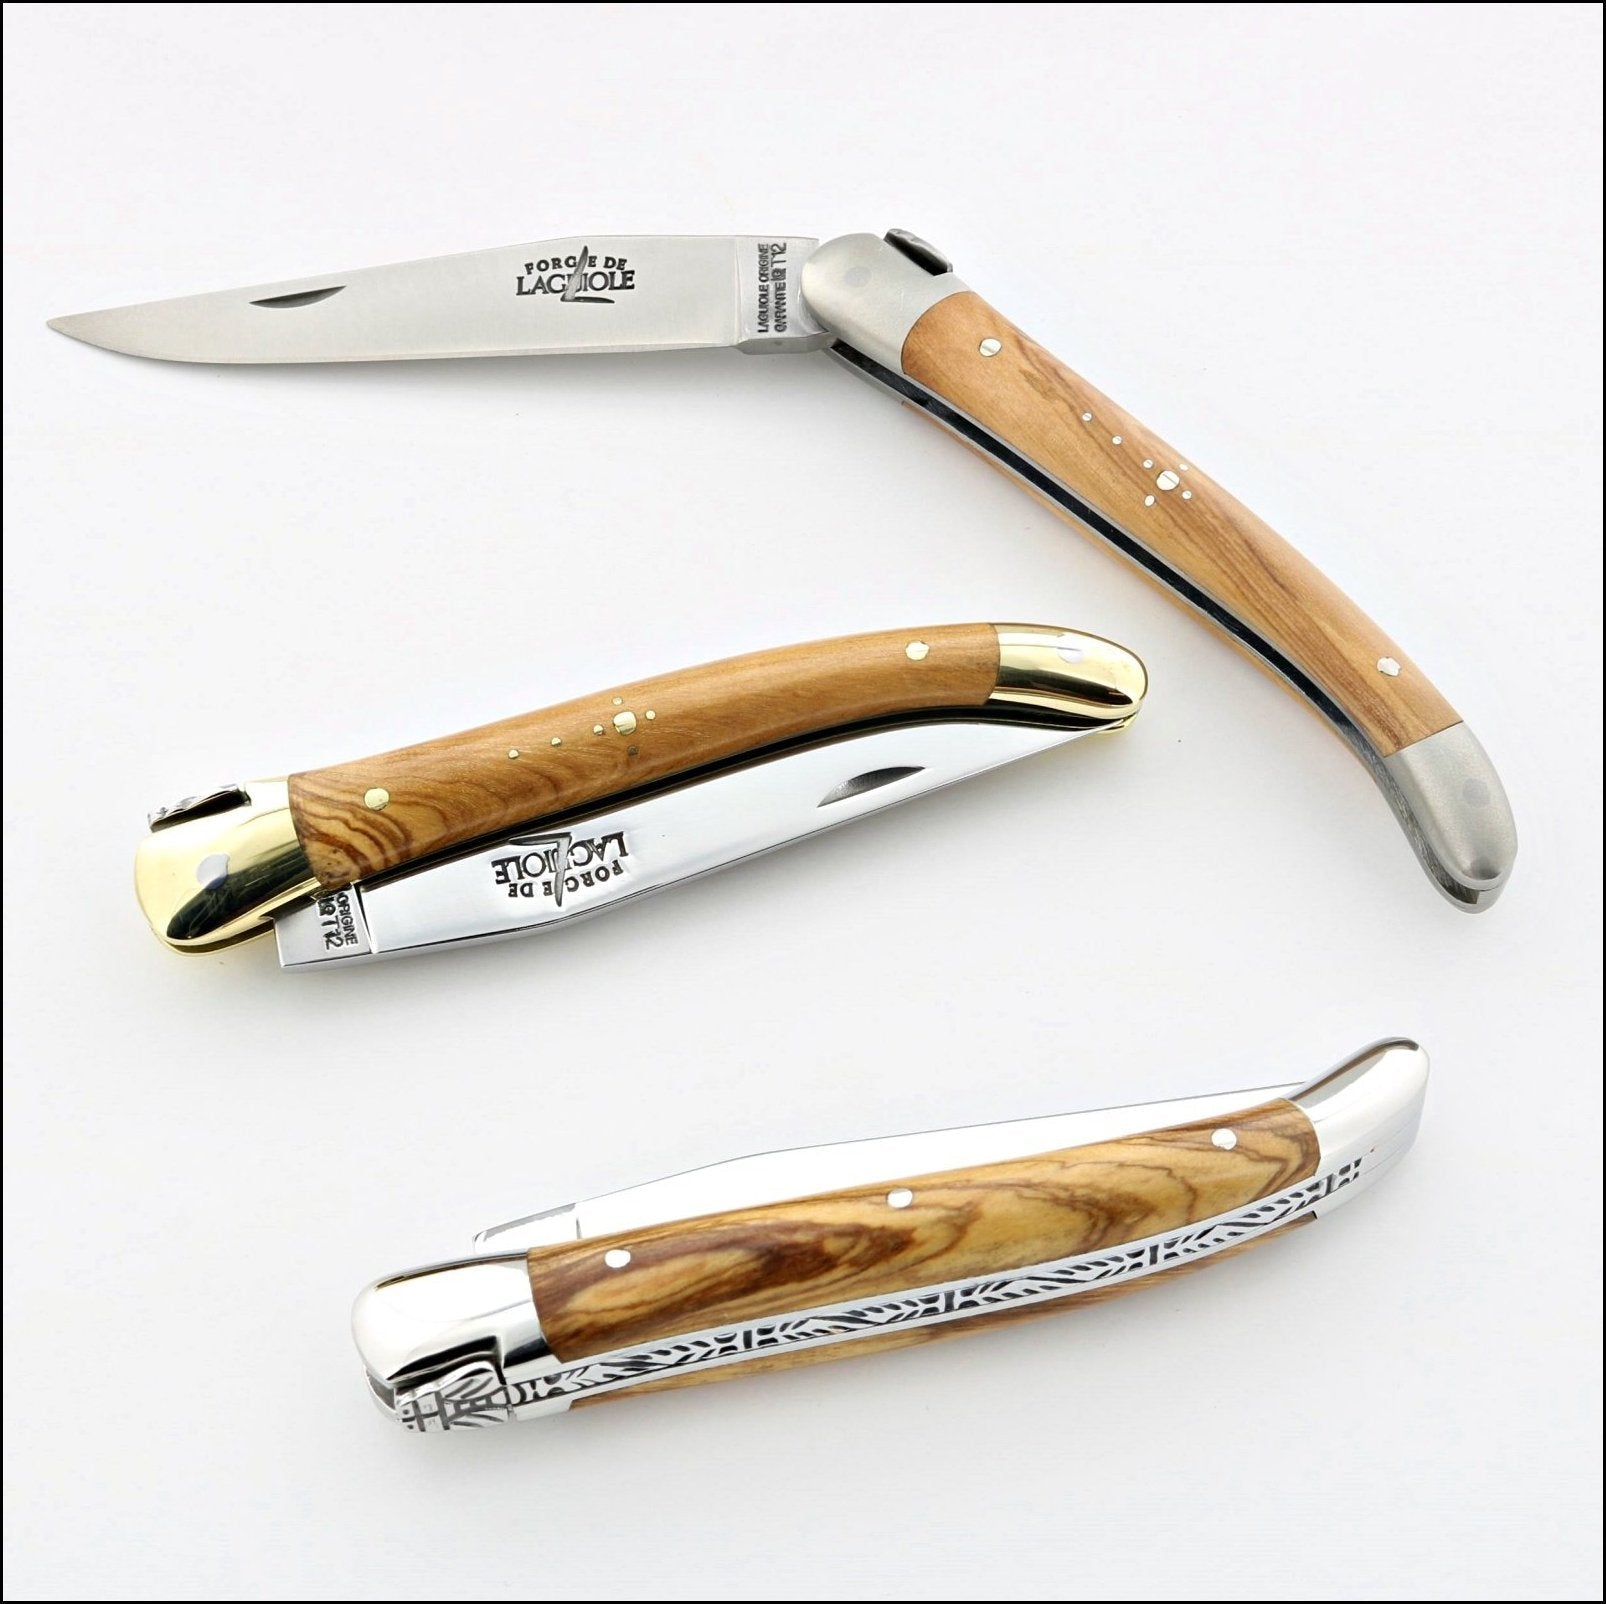 Laguiole knife with olive wood handle and brass bolsters Actiforge